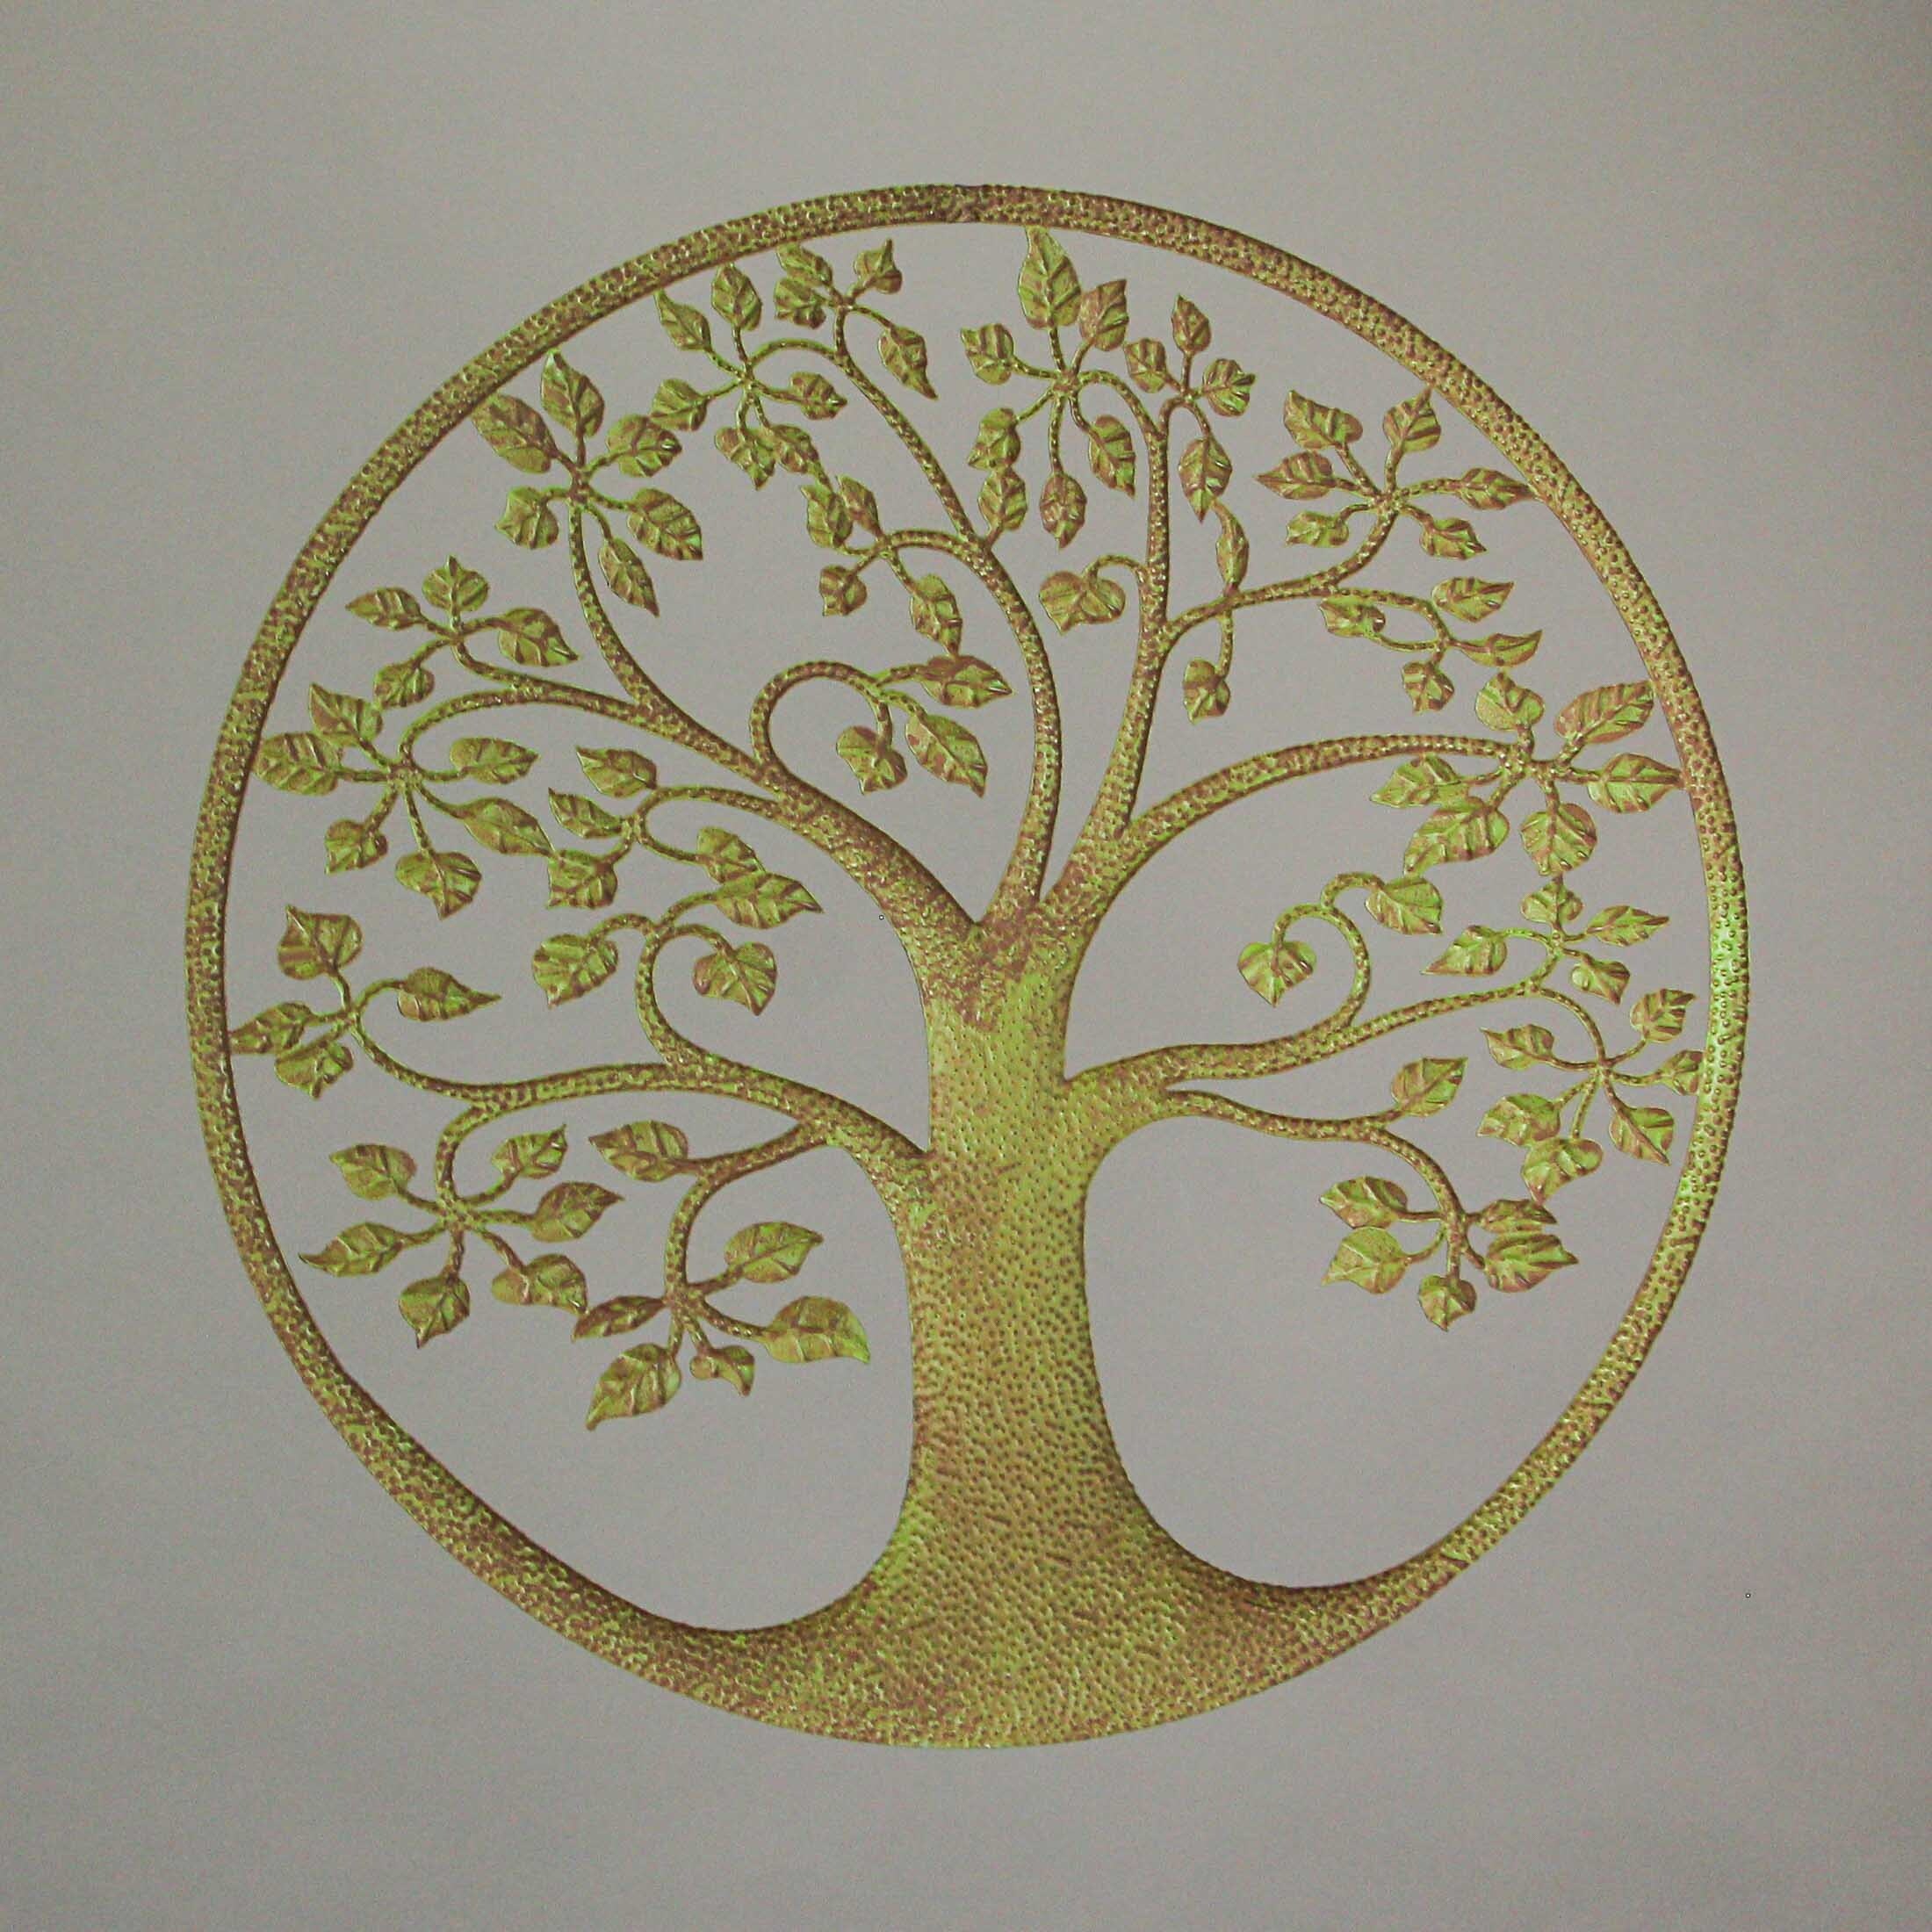 16 Inch Metal Tree Of Life Wall Hanging Sculpture Home Decor Art